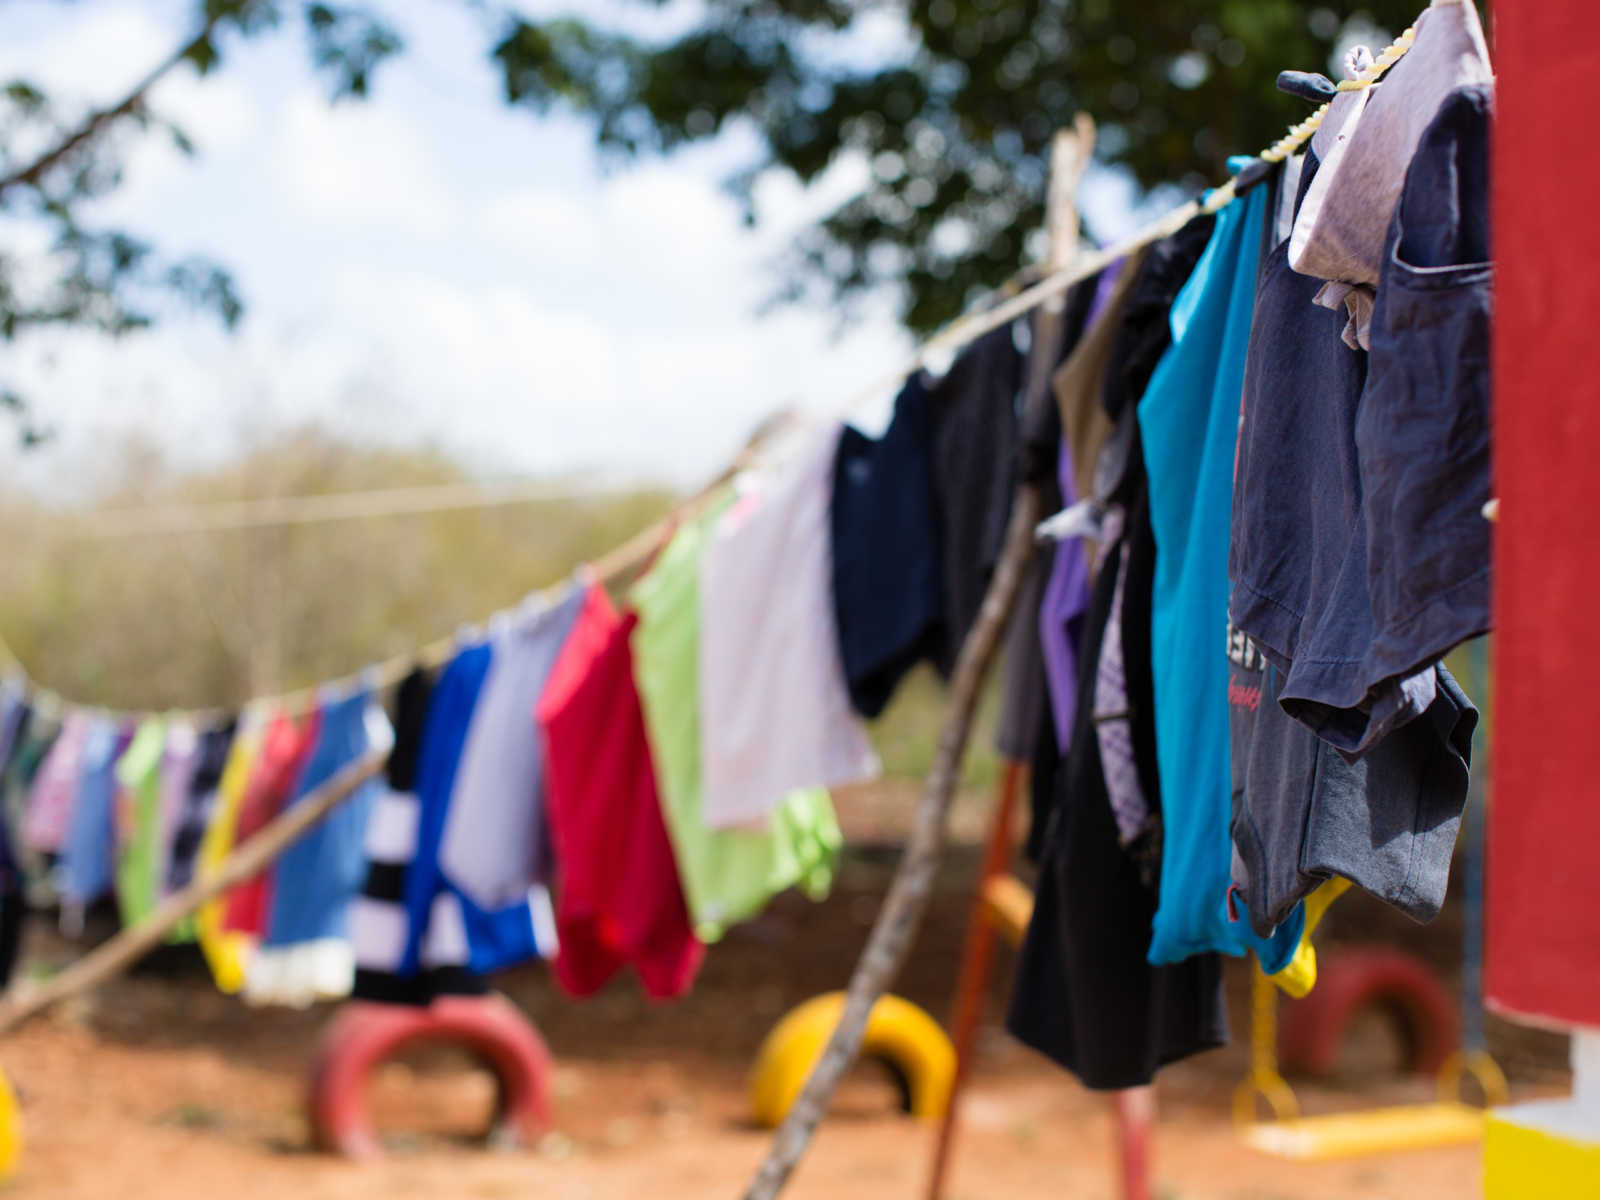 Close up of clothes on clothes line hanging at orphanage outside of Mexico.